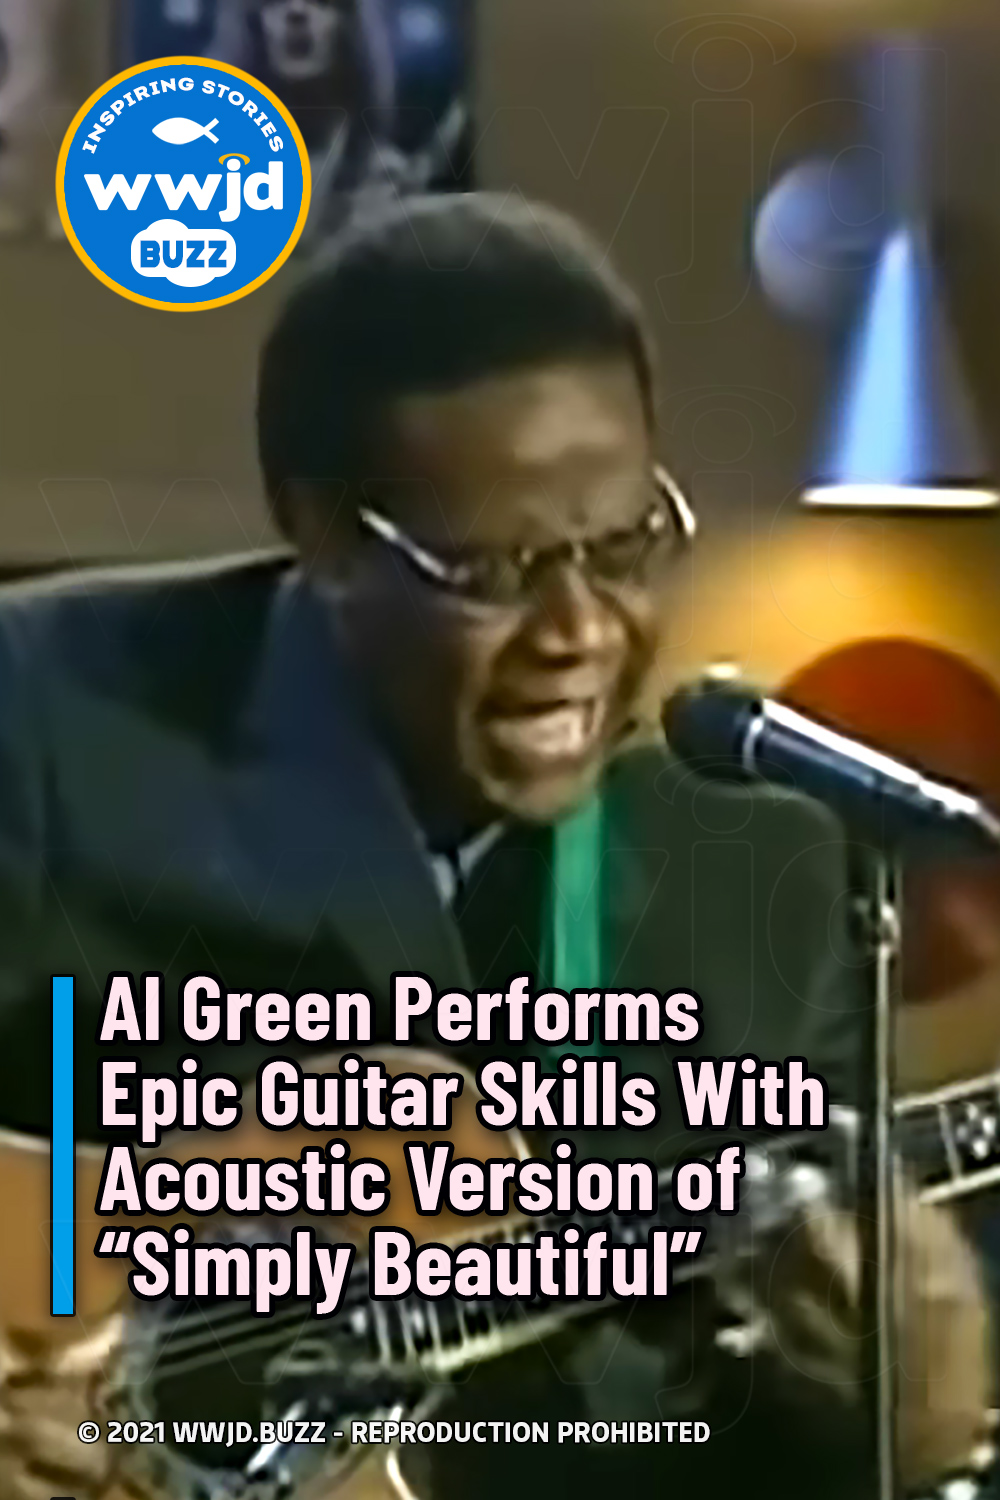 Al Green Performs Epic Guitar Skills With Acoustic Version of “Simply Beautiful”